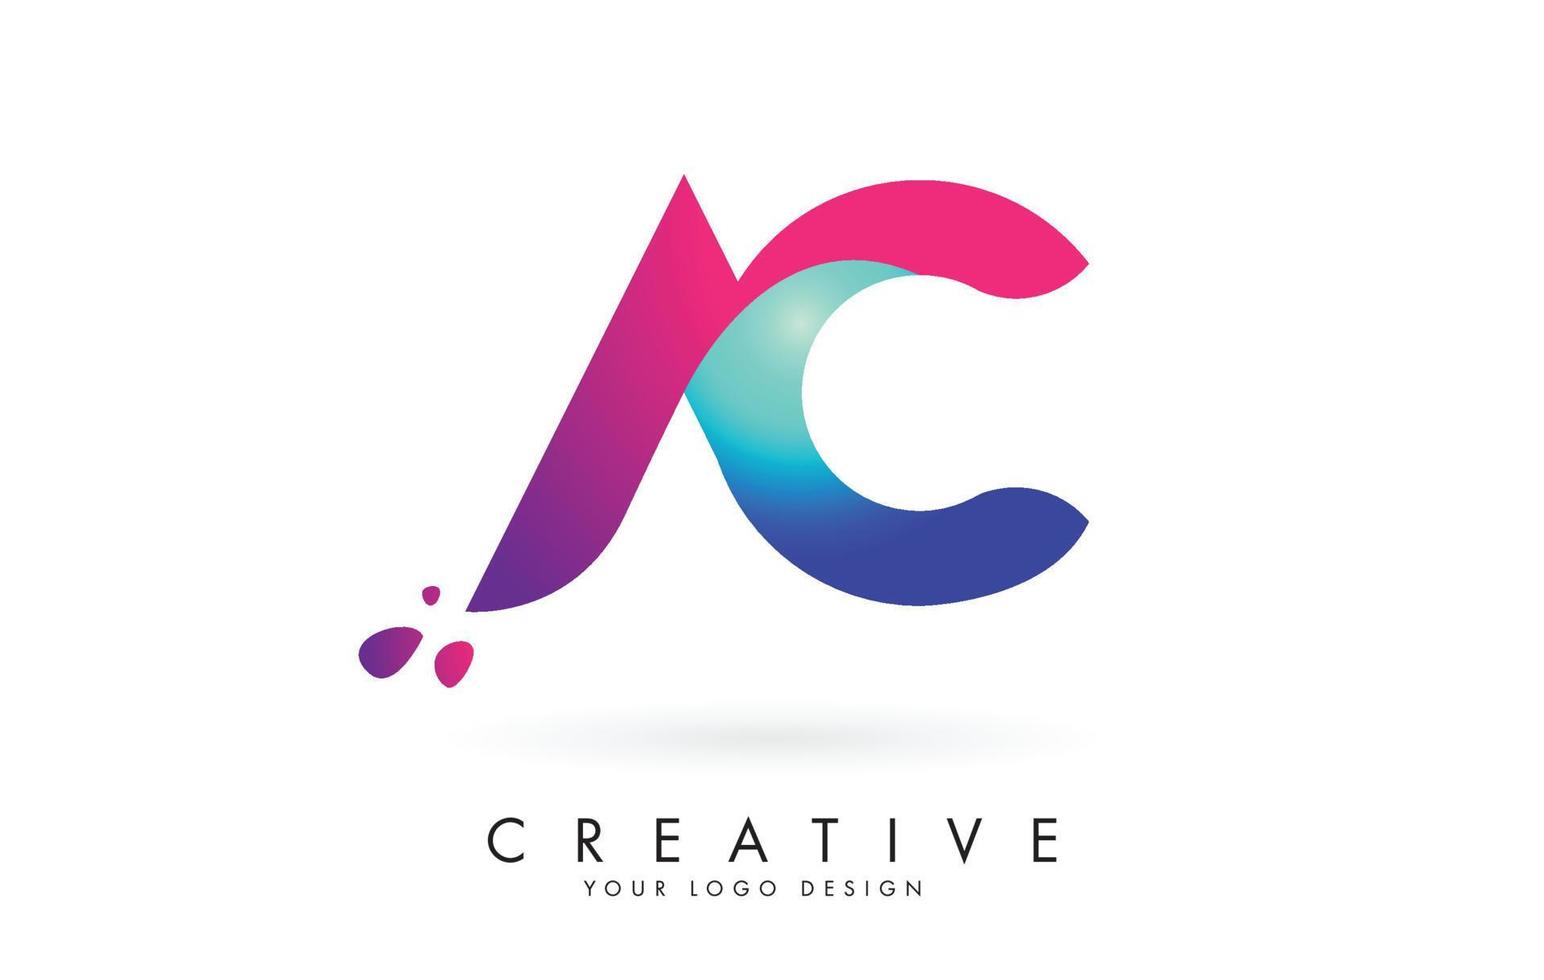 Blue and Pink creative letter AC a c Logo Design. Corporate Entertainment, Media, Technology, Digital Business vector design.